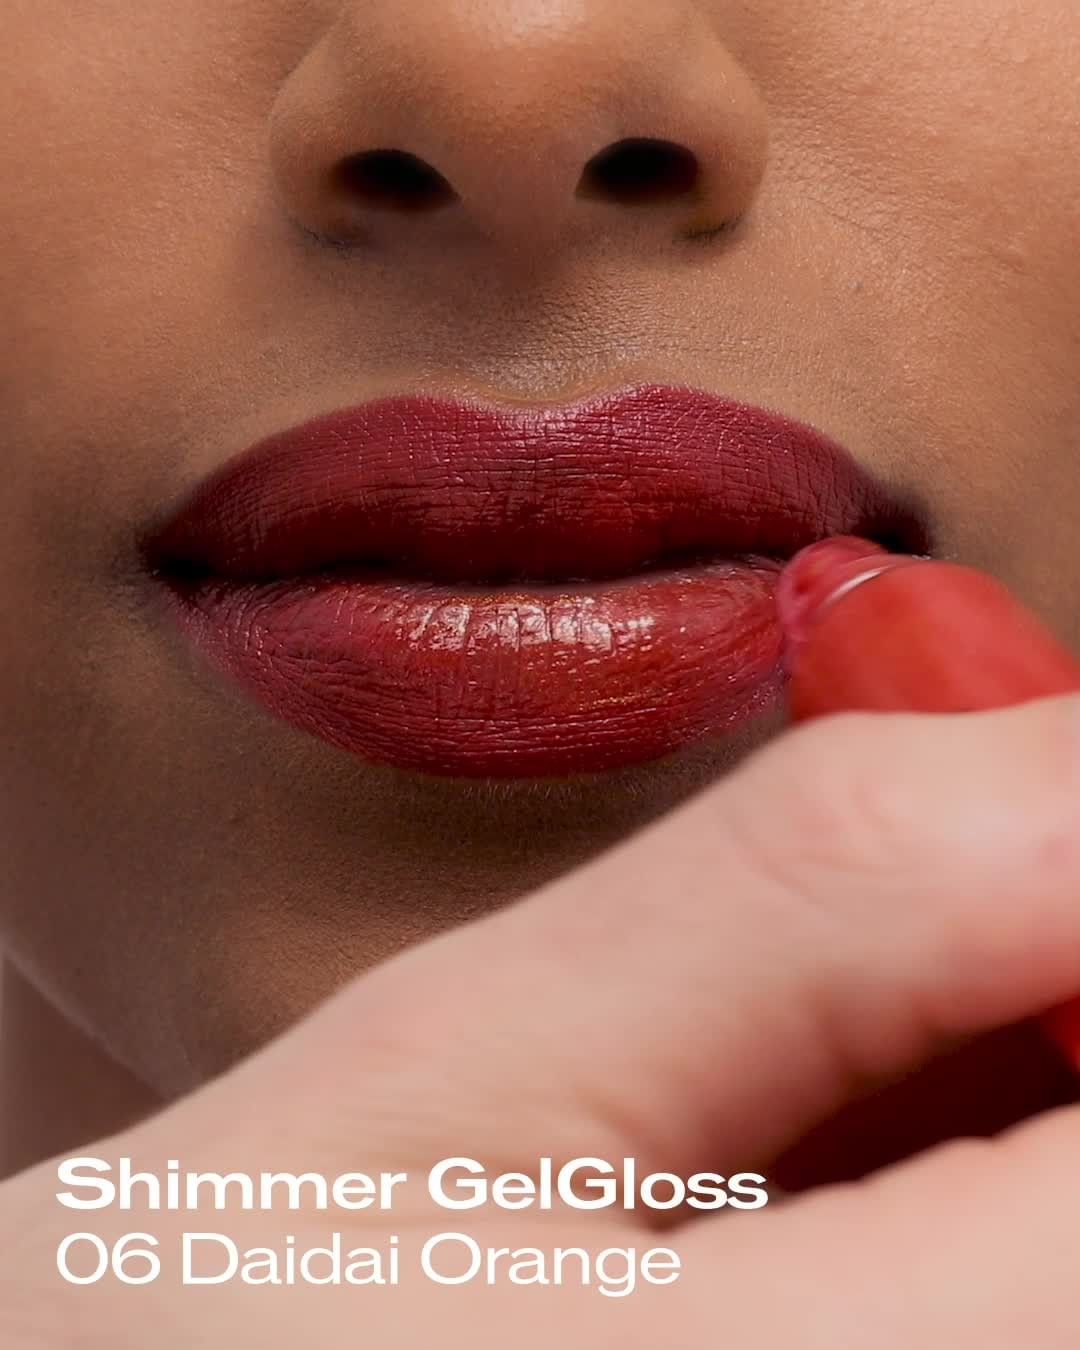 SHISEIDO - Add moisture and major shine in a single swipe. Top your go-to red (like ModernMatte Powder Lipstick in Mellow Drama) with Shimmer GelGloss in Daidai Orange, a shade made to mirror the blaz...